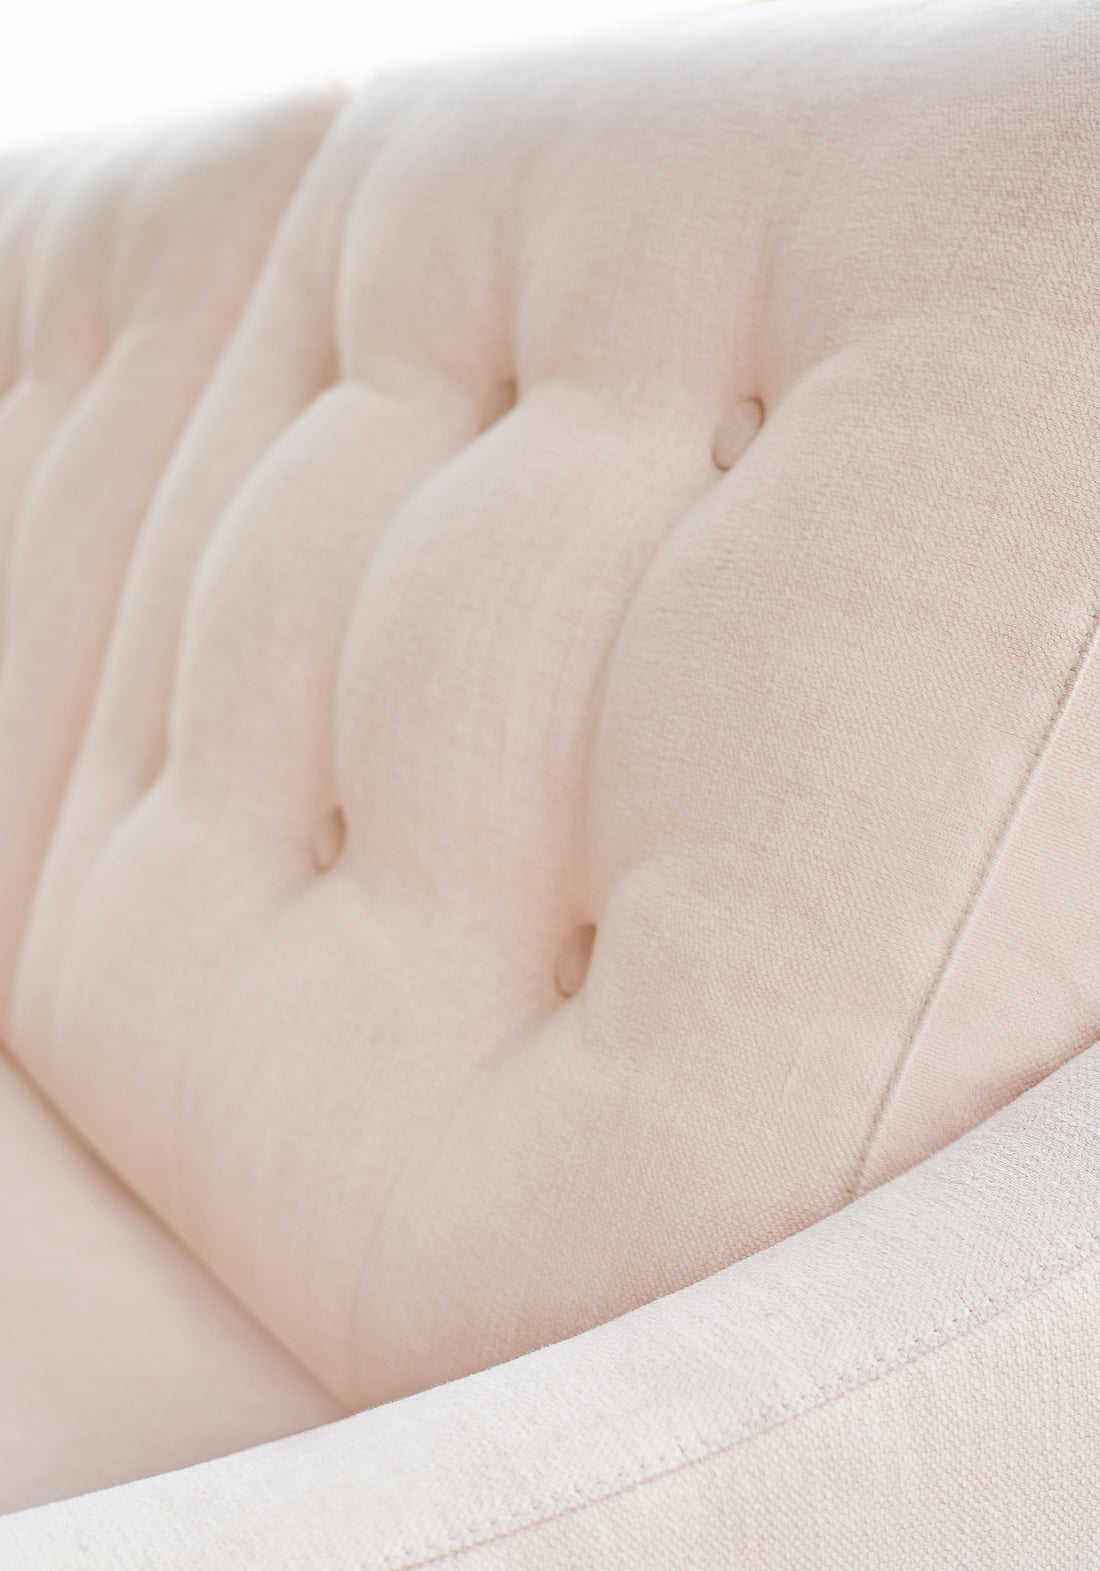 Detail of Dixon Sofa in Prisma woven fabric in blossom color of the Woven Resource Vol 12 Prisma collection by Thibaut - pattern number W70131